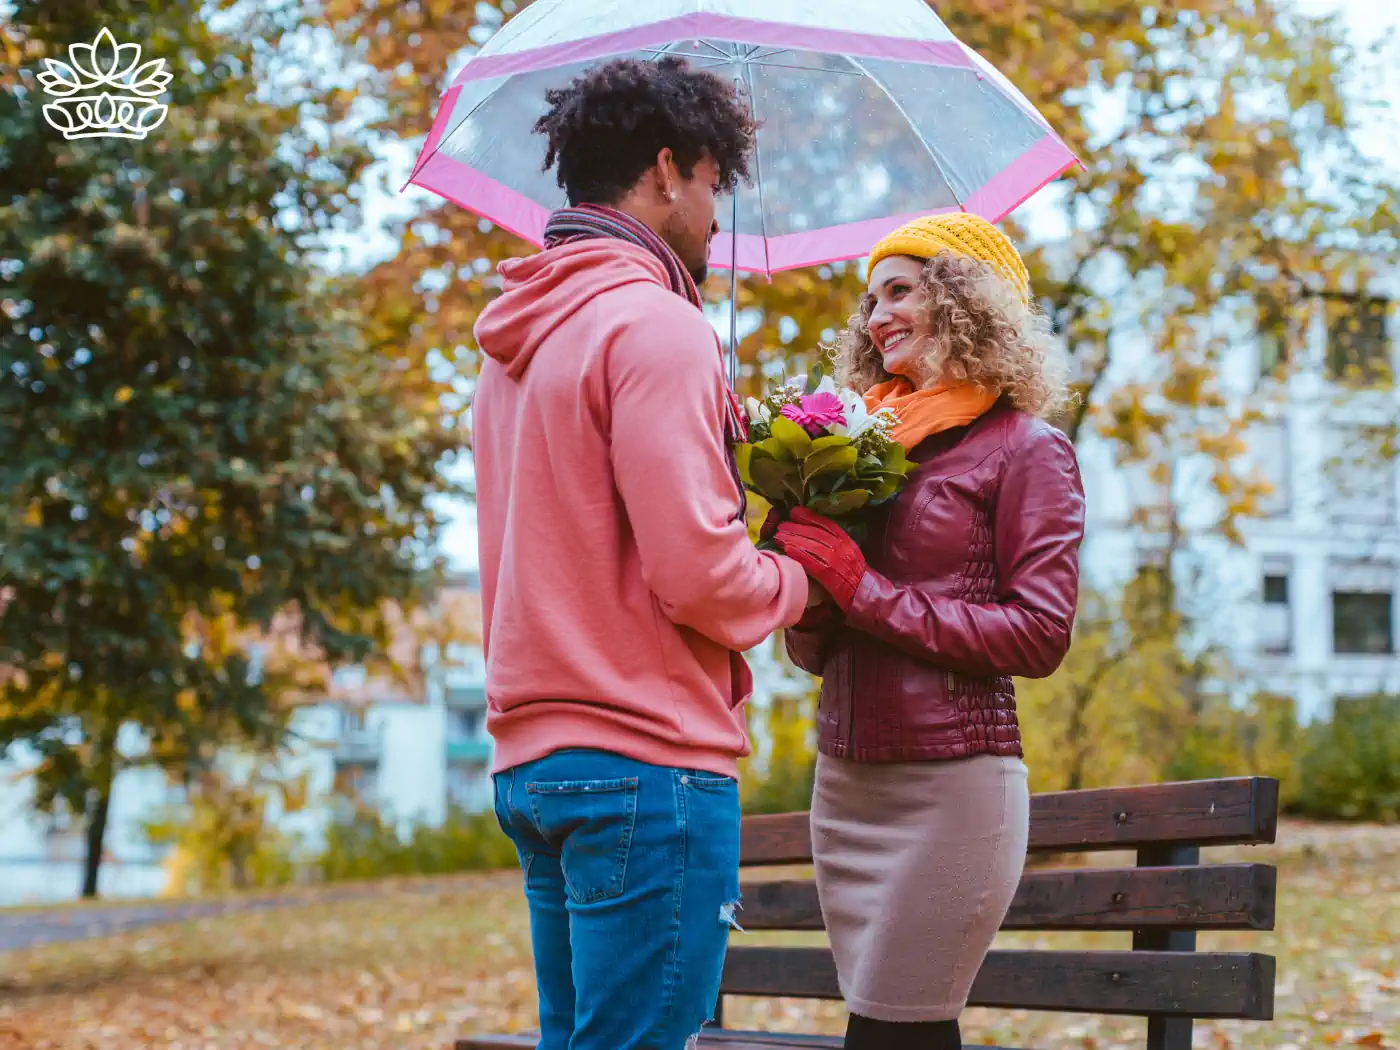 Image of a couple standing under an umbrella in a park, the man giving a flower bouquet to the woman. Fabulous Flowers and Gifts - Luxury Flower Bouquets.